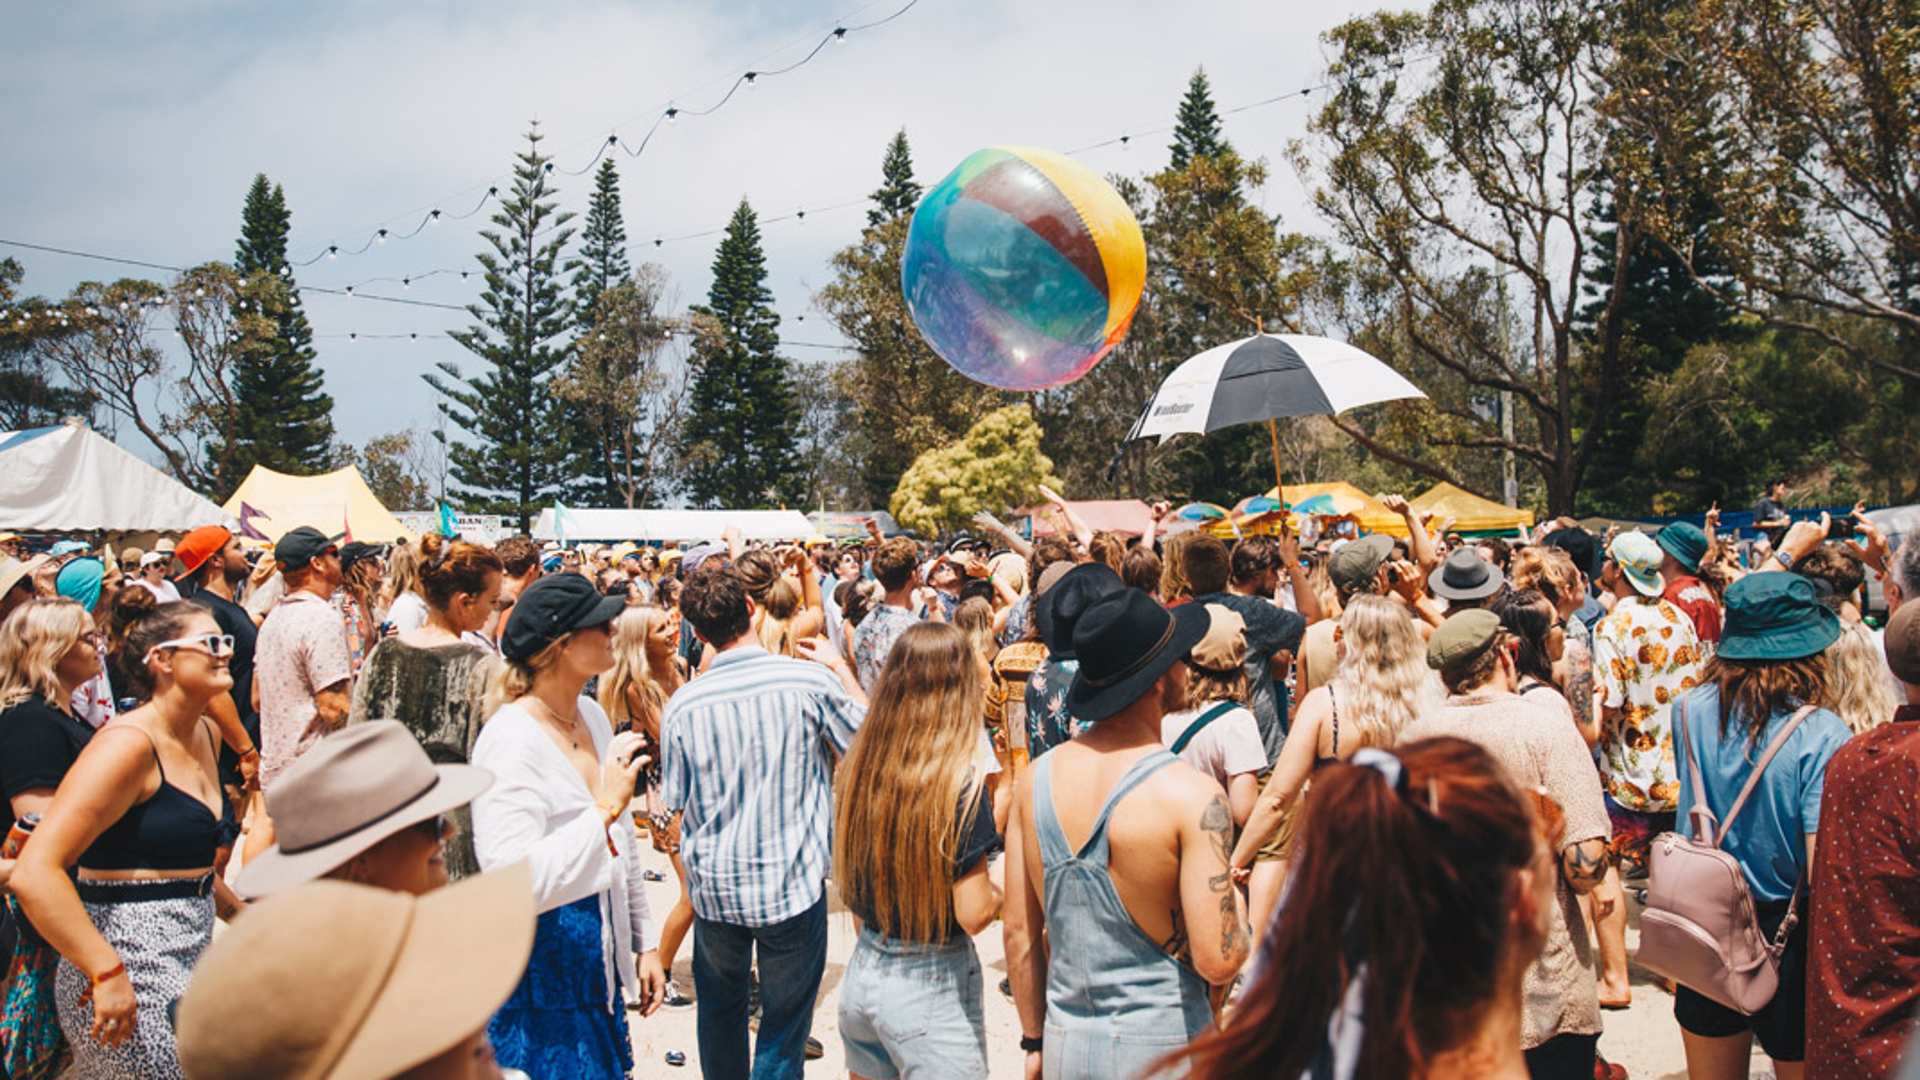 Festival of the Sun Is Returning to Port Macquarie for Its Second Boutique BYO Music Festival of 2022